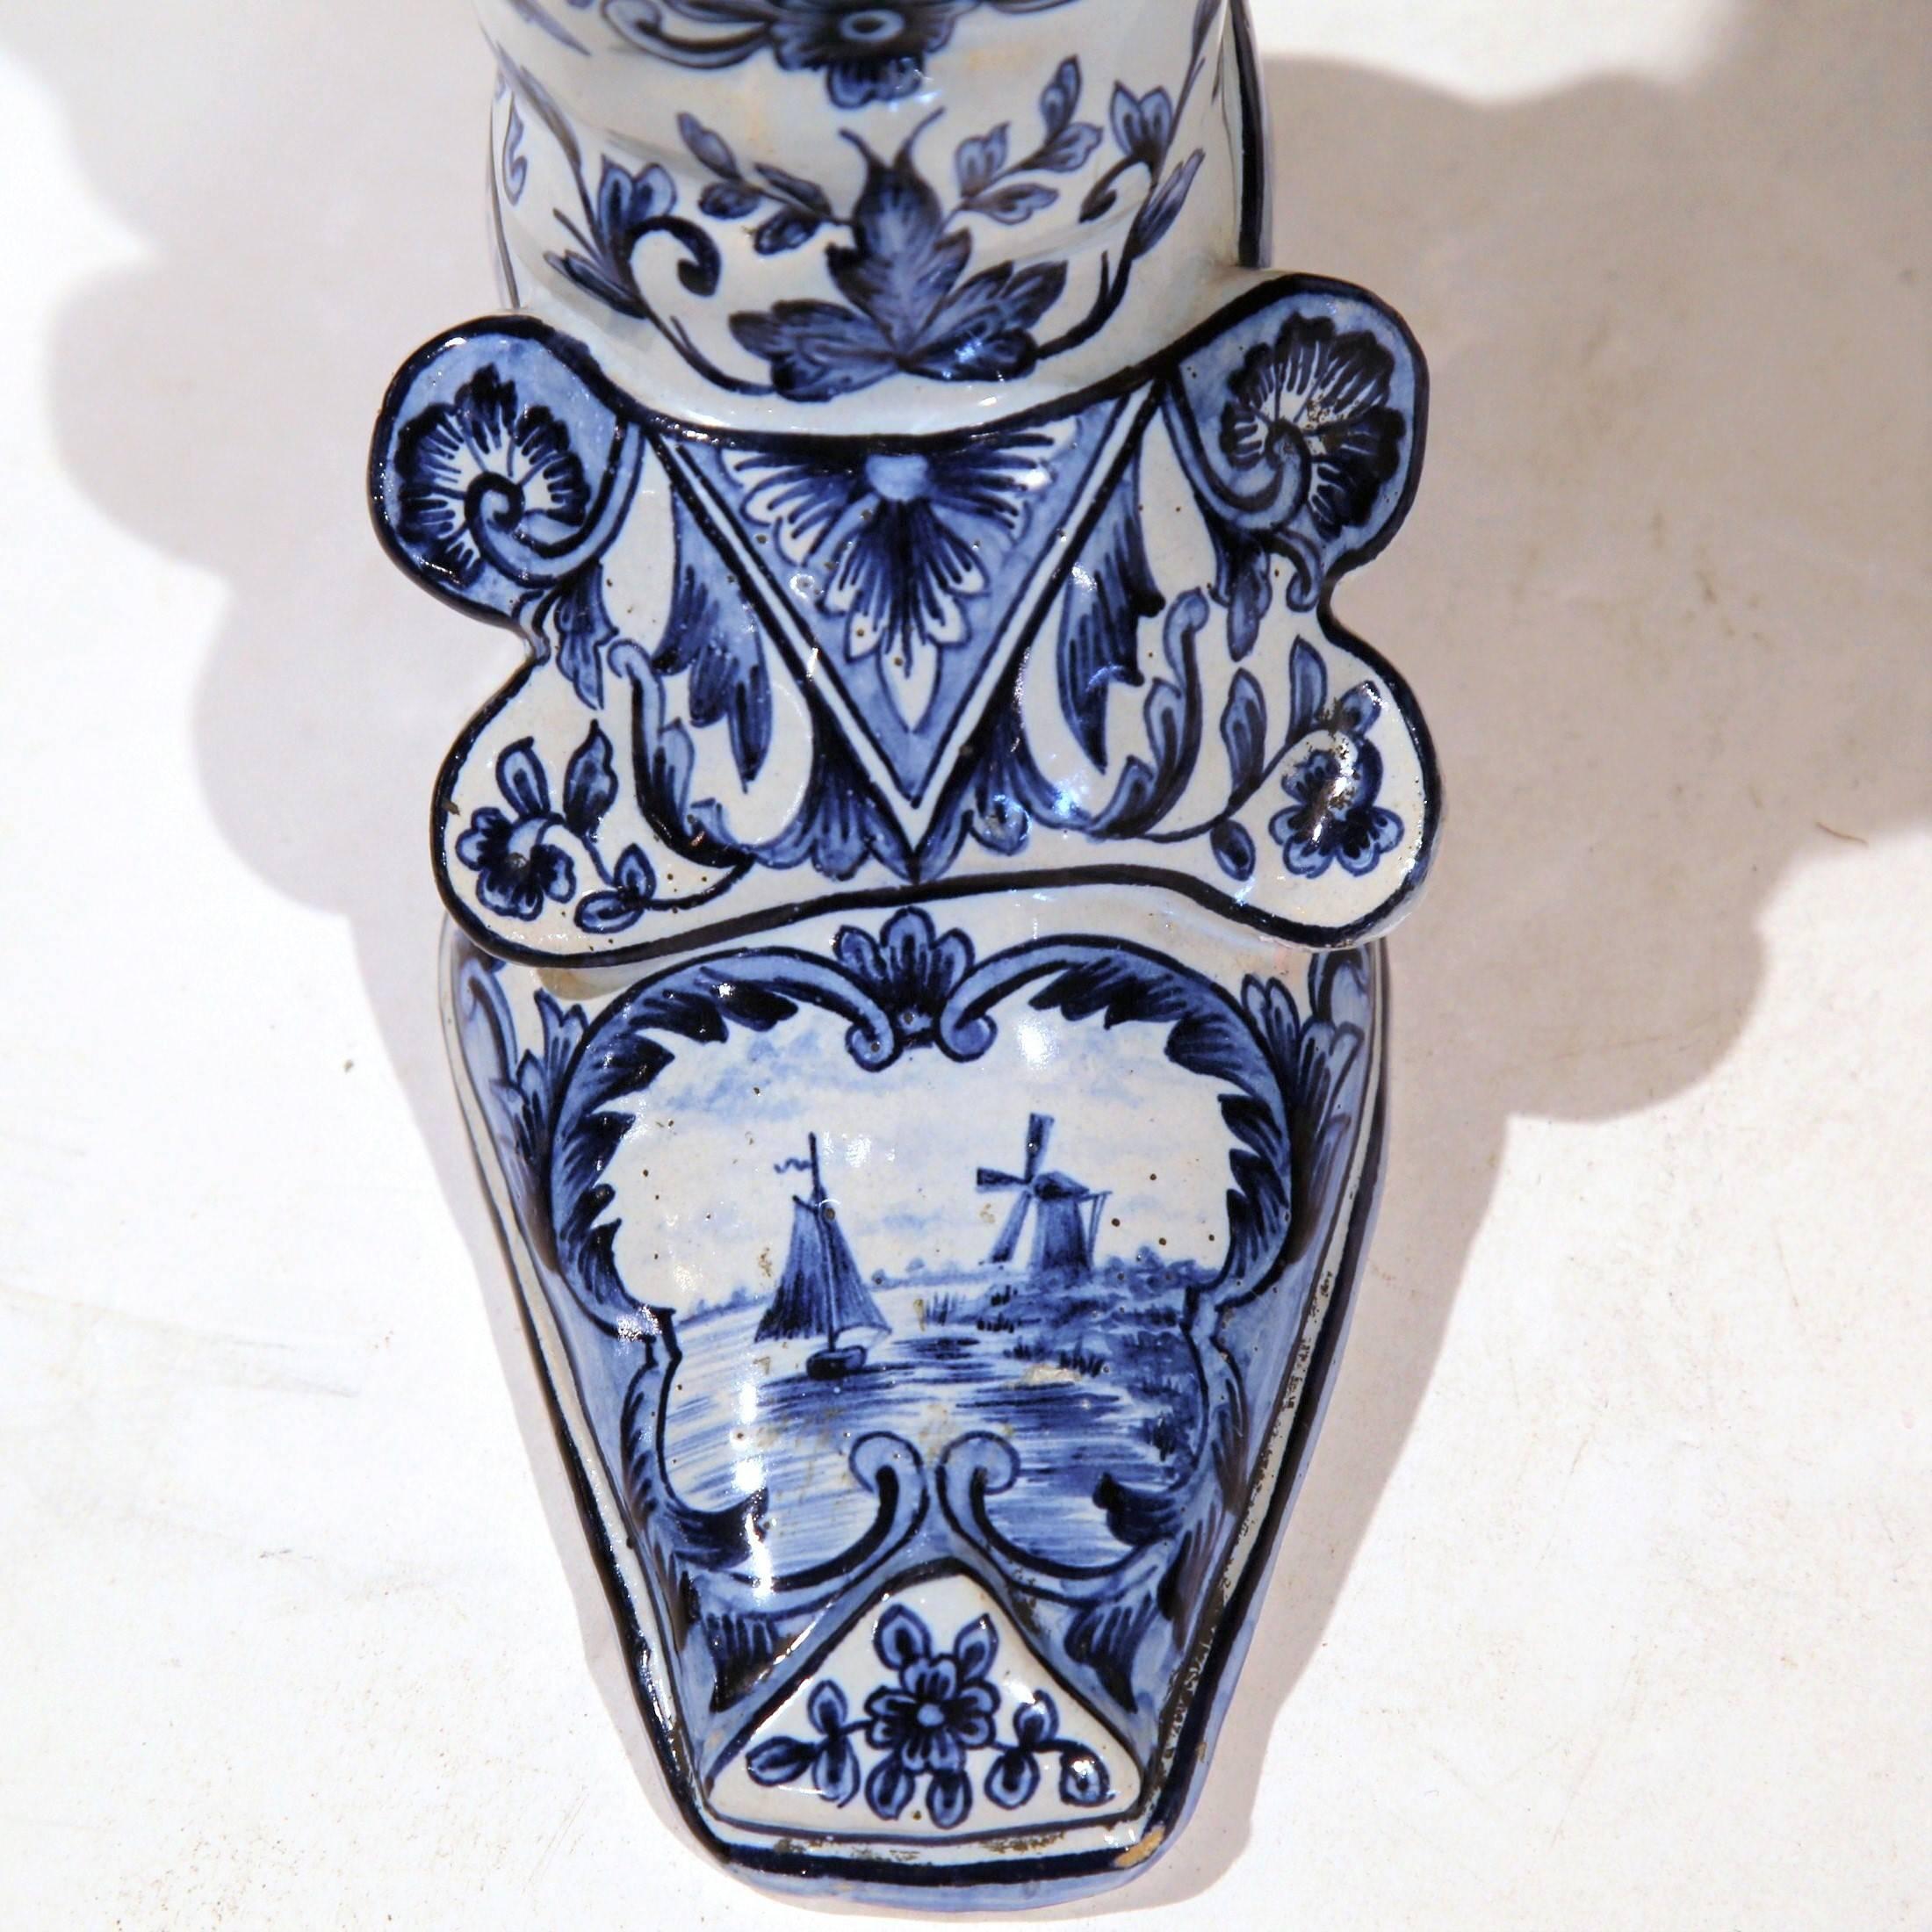 Ceramic Early 20th Century Hand-Painted Blue and White Vase Shaped as a Boot